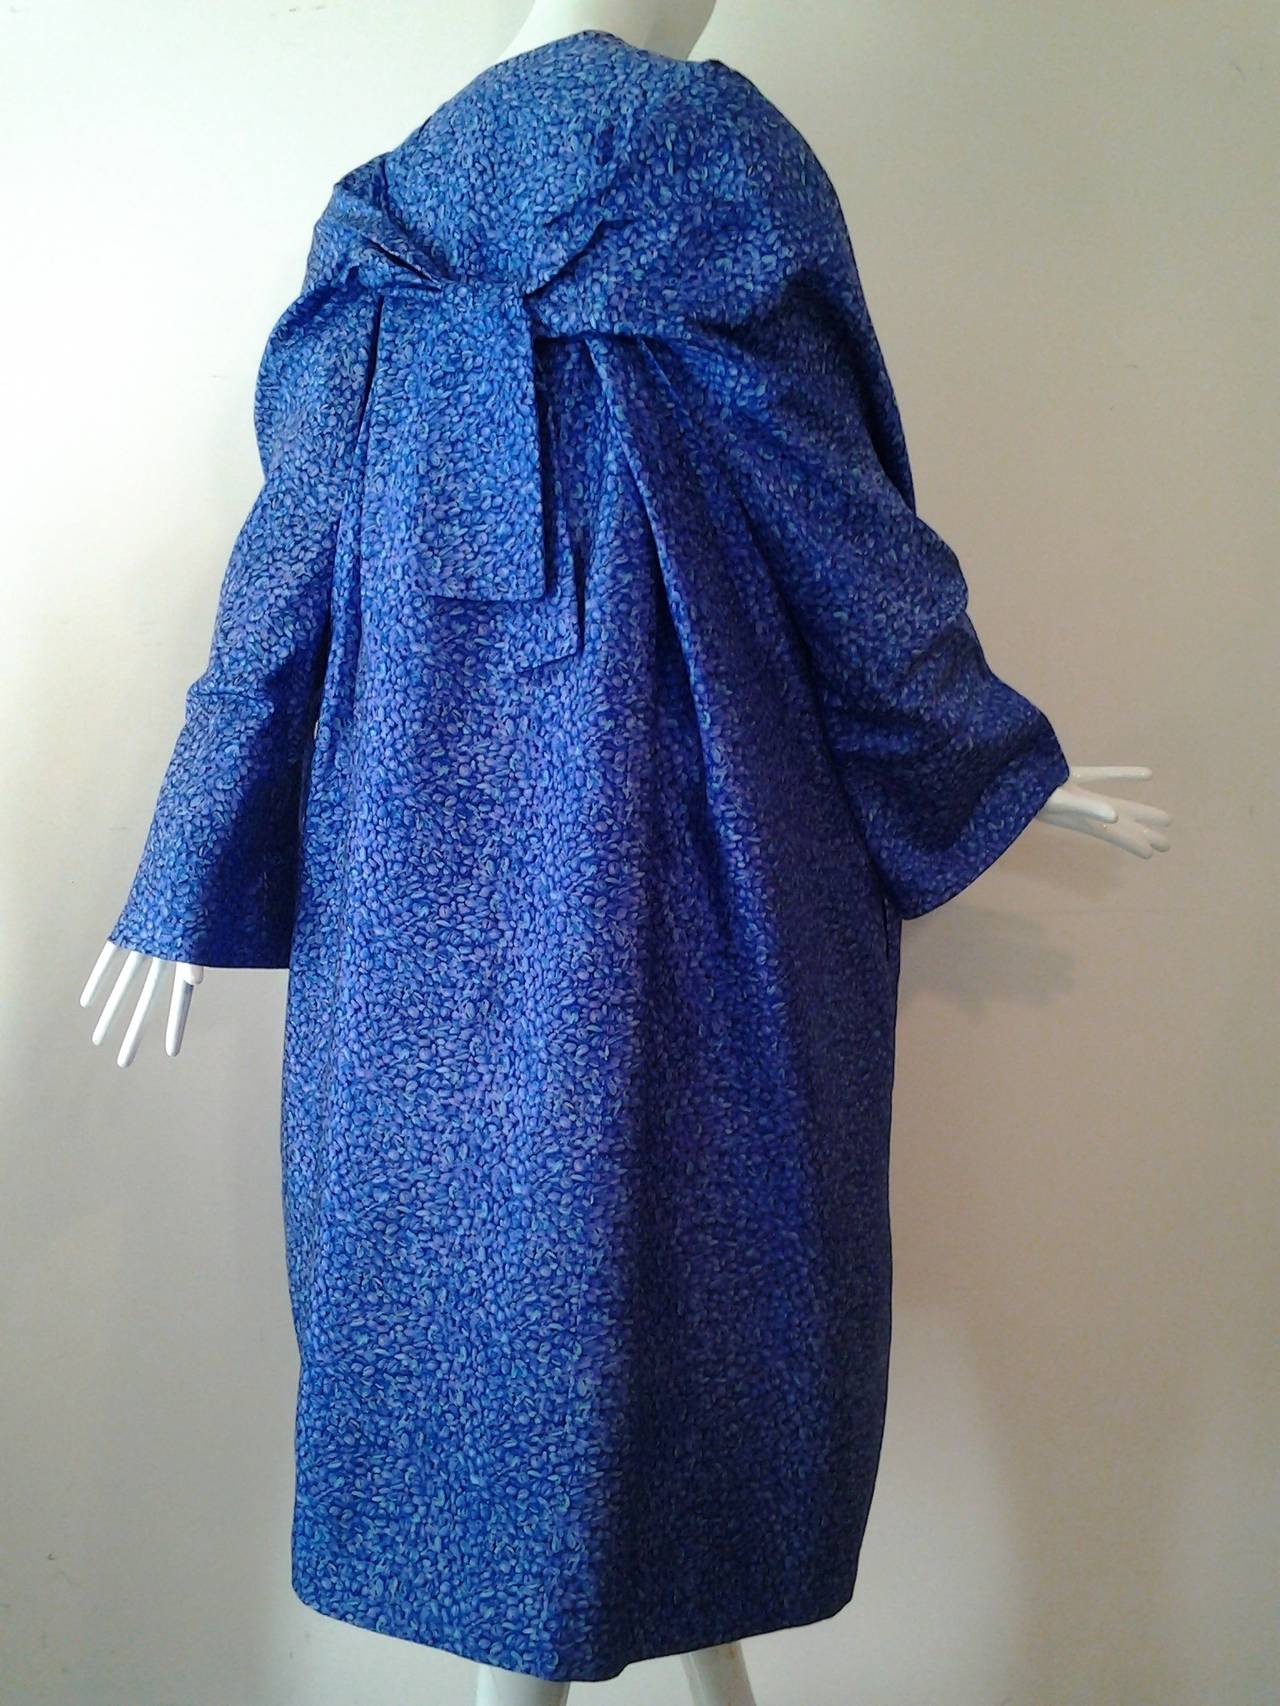 Women's 1950s Hattie Carnegie Silk Dress and Coat Ensemble - Owned By Ginger Rogers